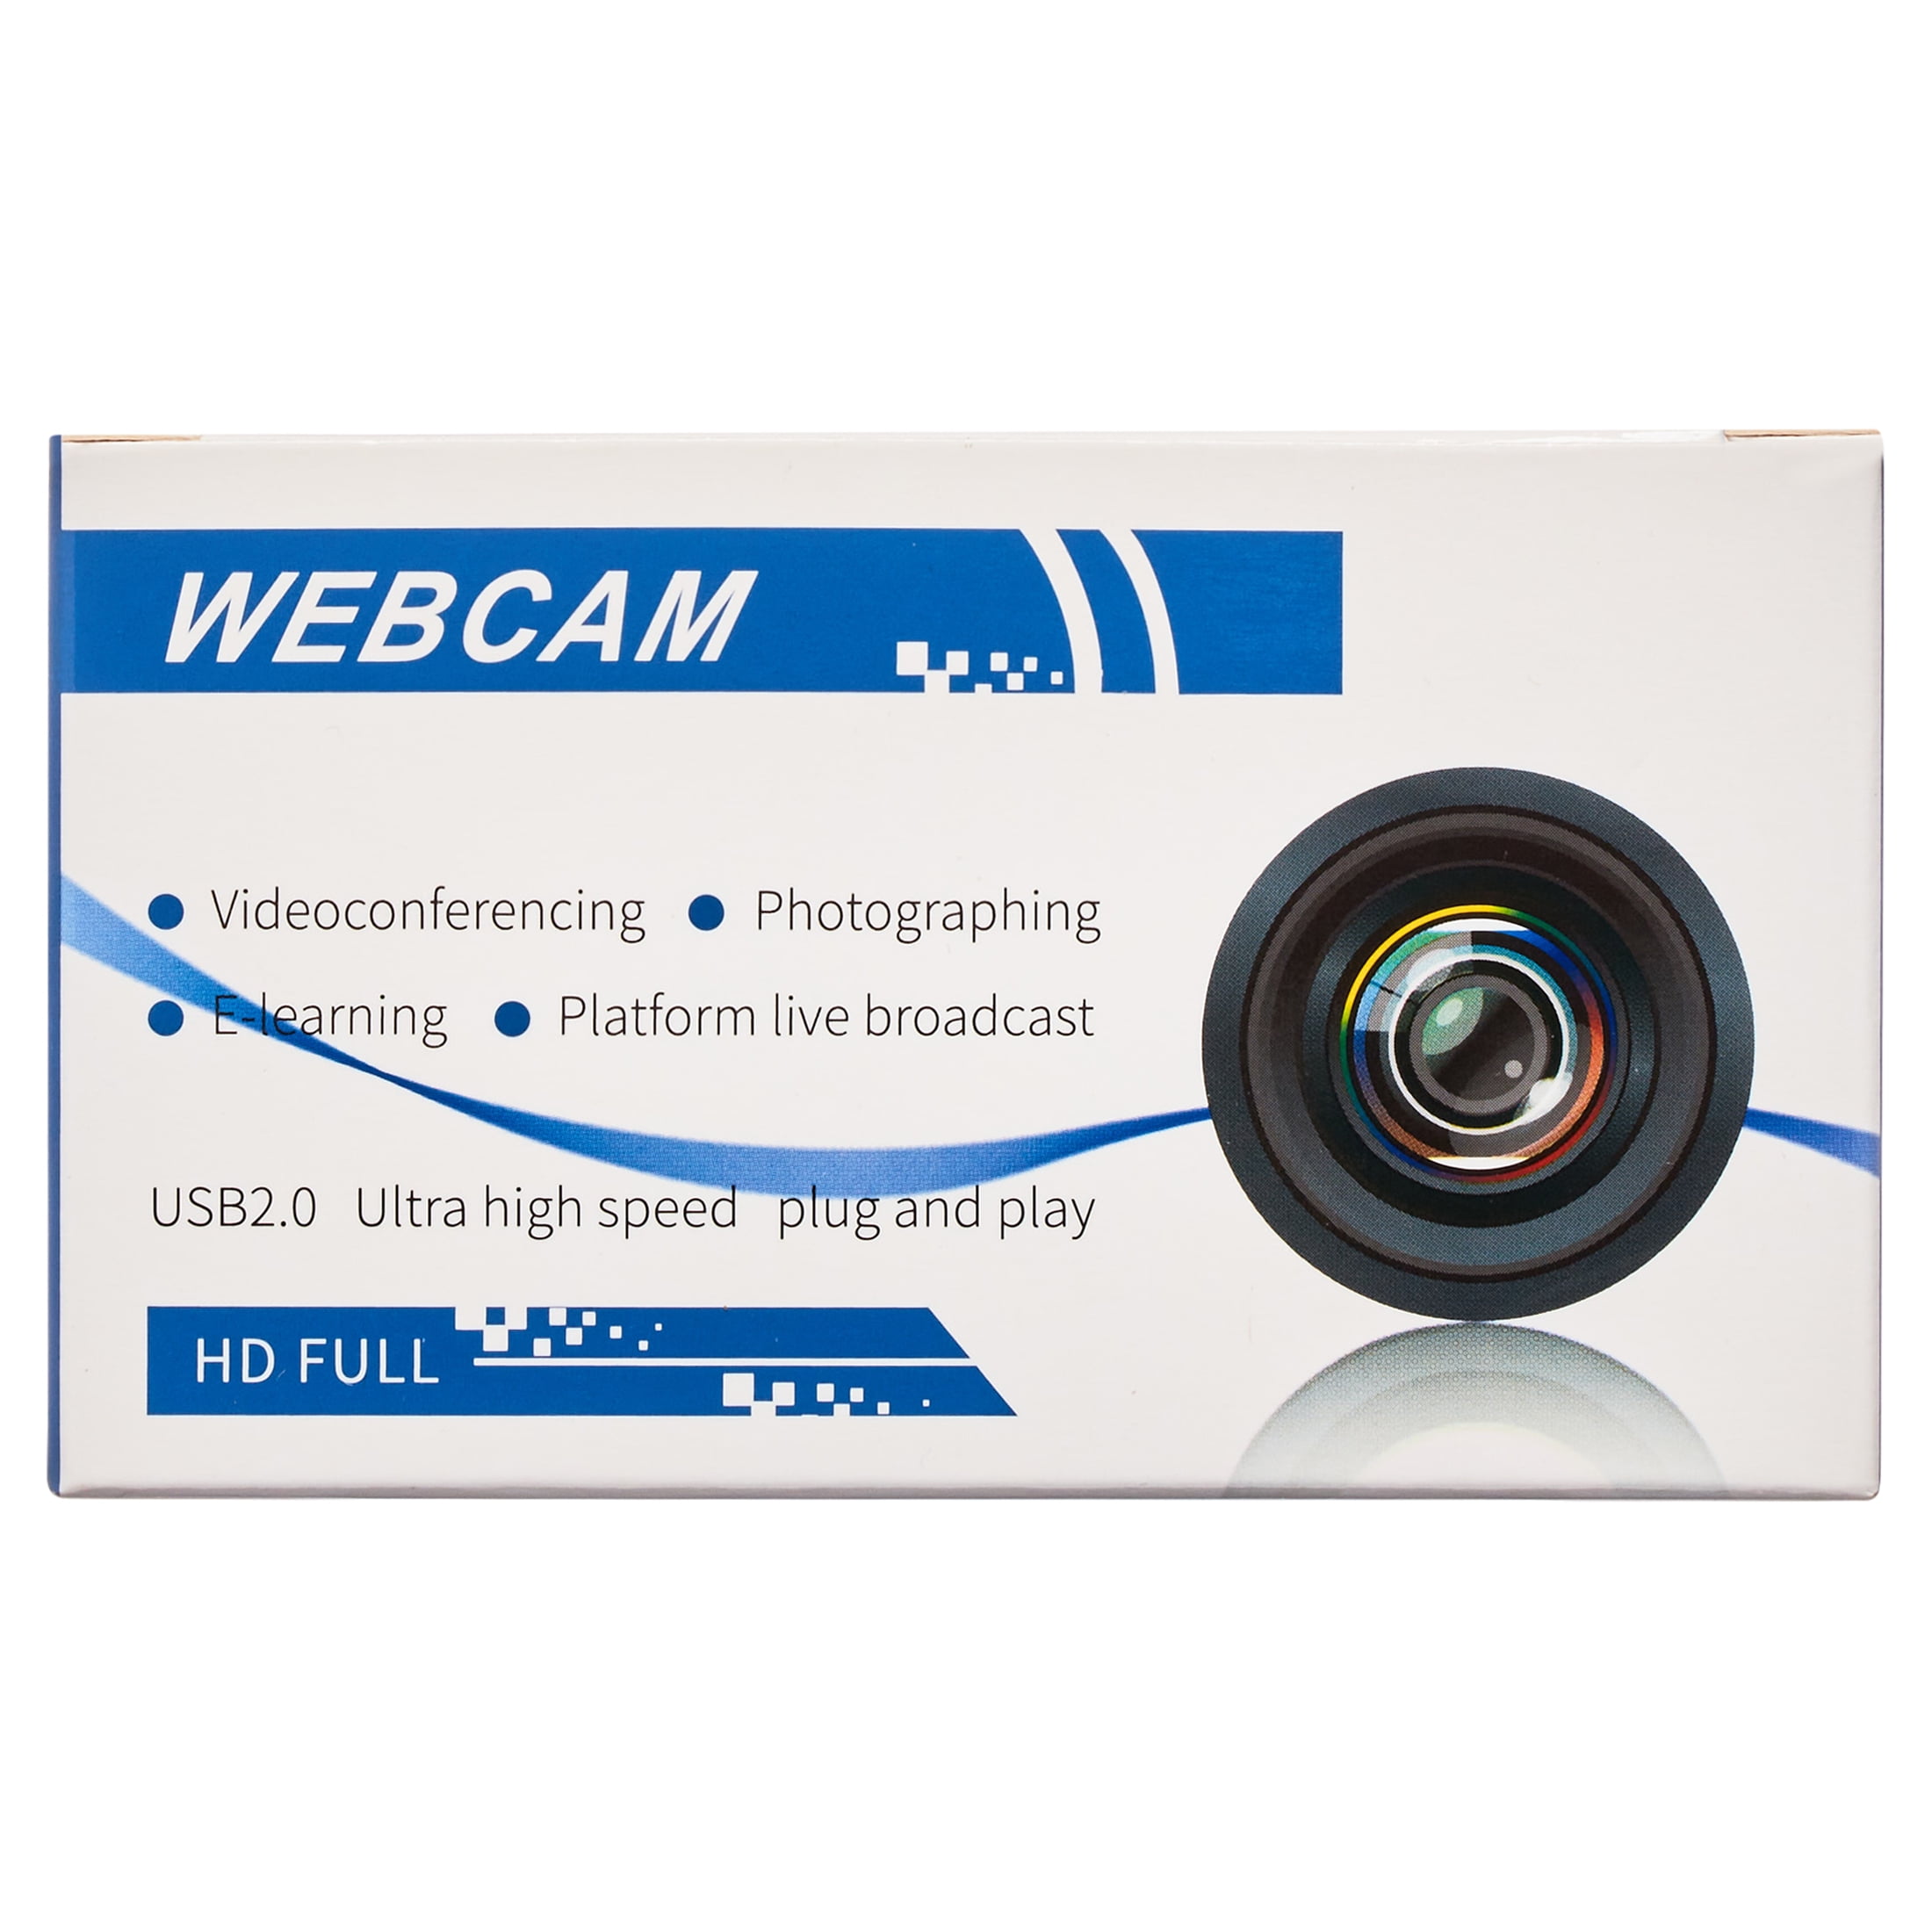 1080P Full HD Webcam with Built-In Microphone, 30 FPS, Plug and Play